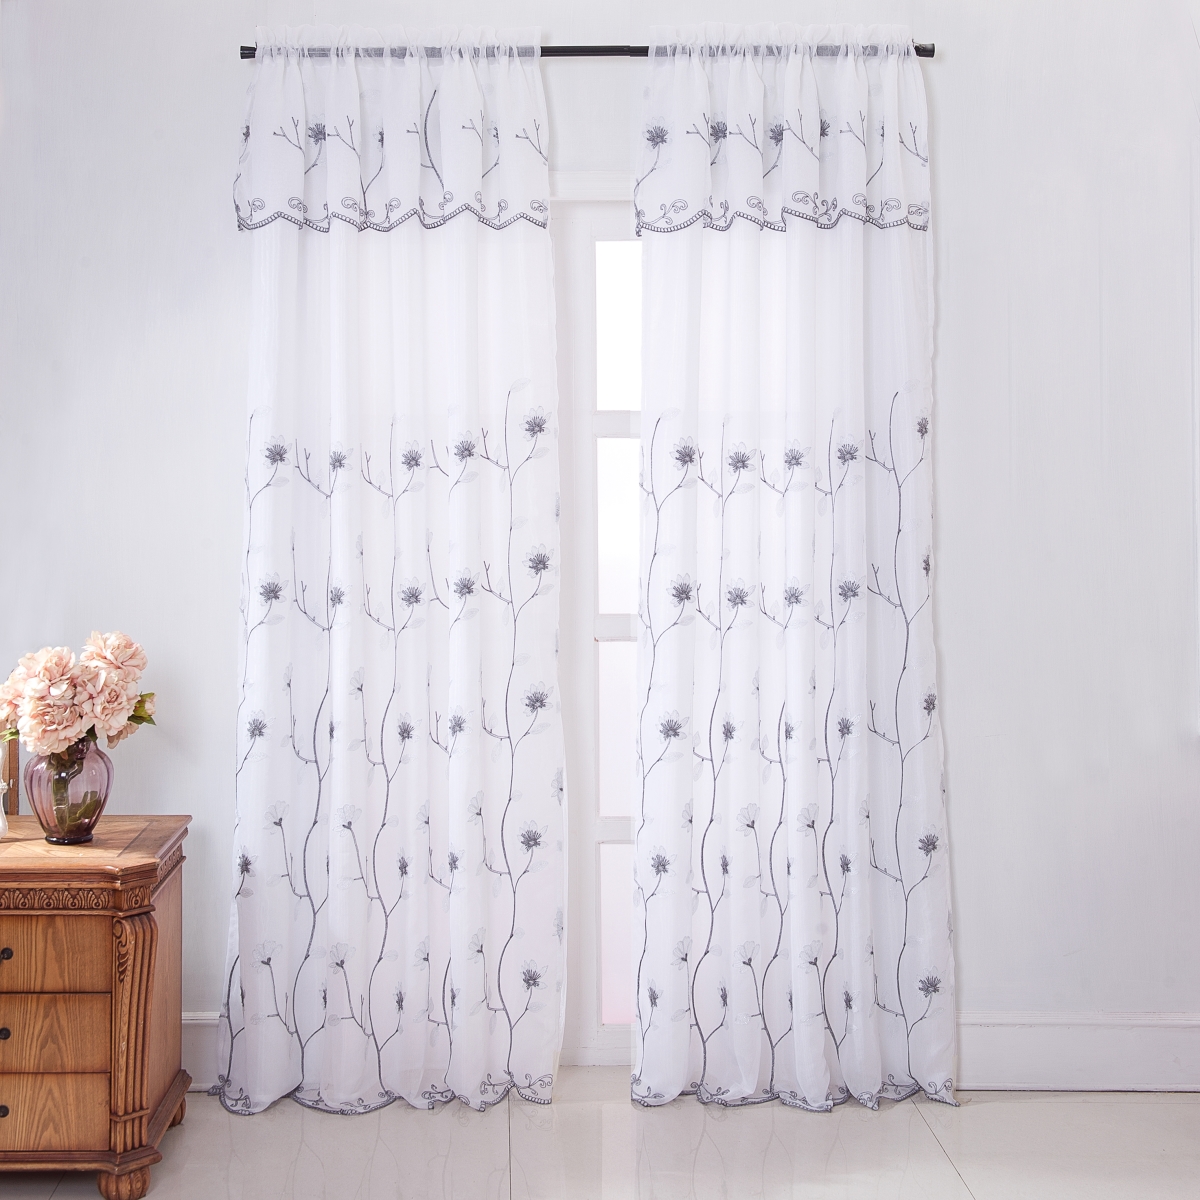 Pnr19297 Ruby Floral Embroidered Rod Pocket Single Curtain Panel In Silver & White - 54 X 90 In.